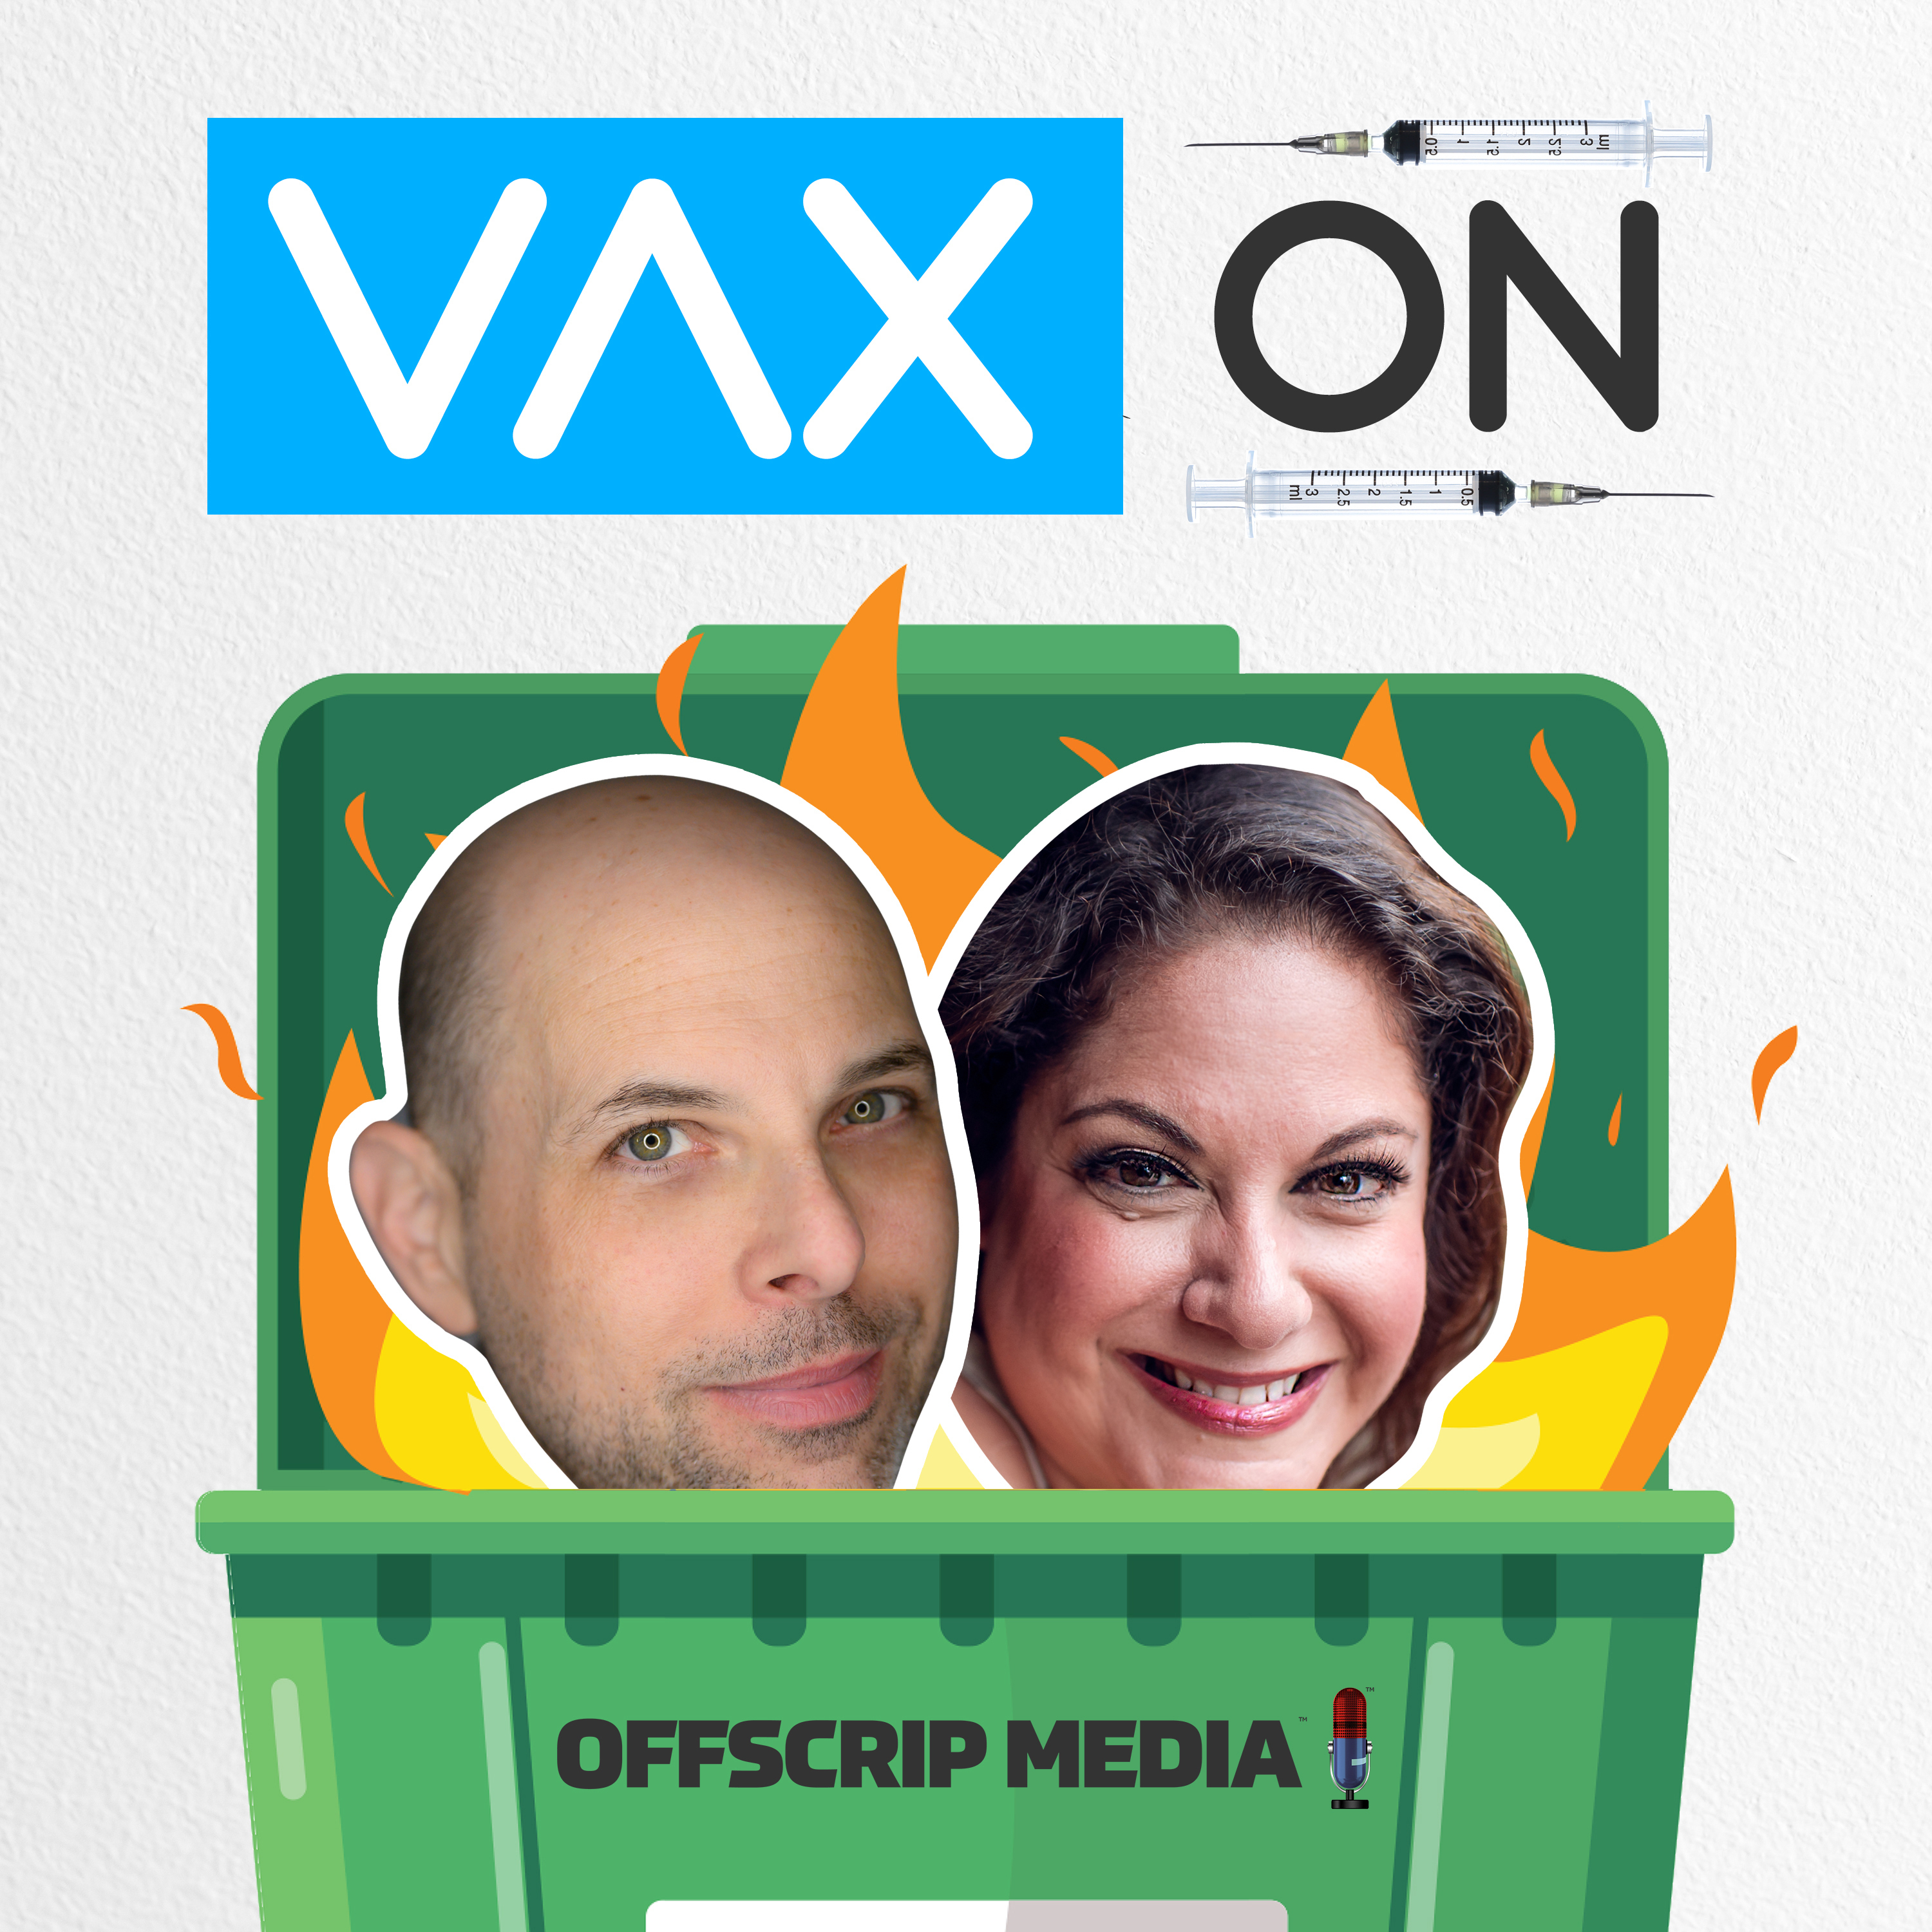 VAX ON: Mount Everest, No More NJ Online Learning, and Prison from Home